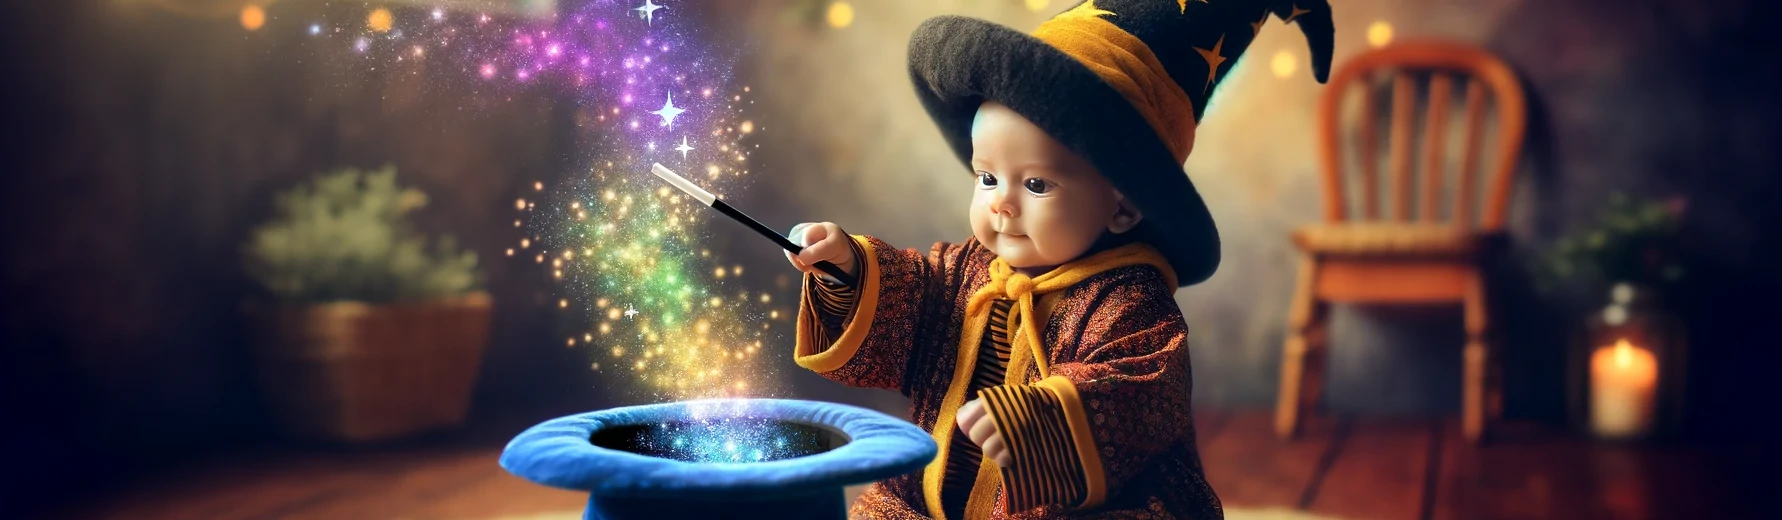 Baby Wizard waving his magic wand over his magic hat to practice his spell casting